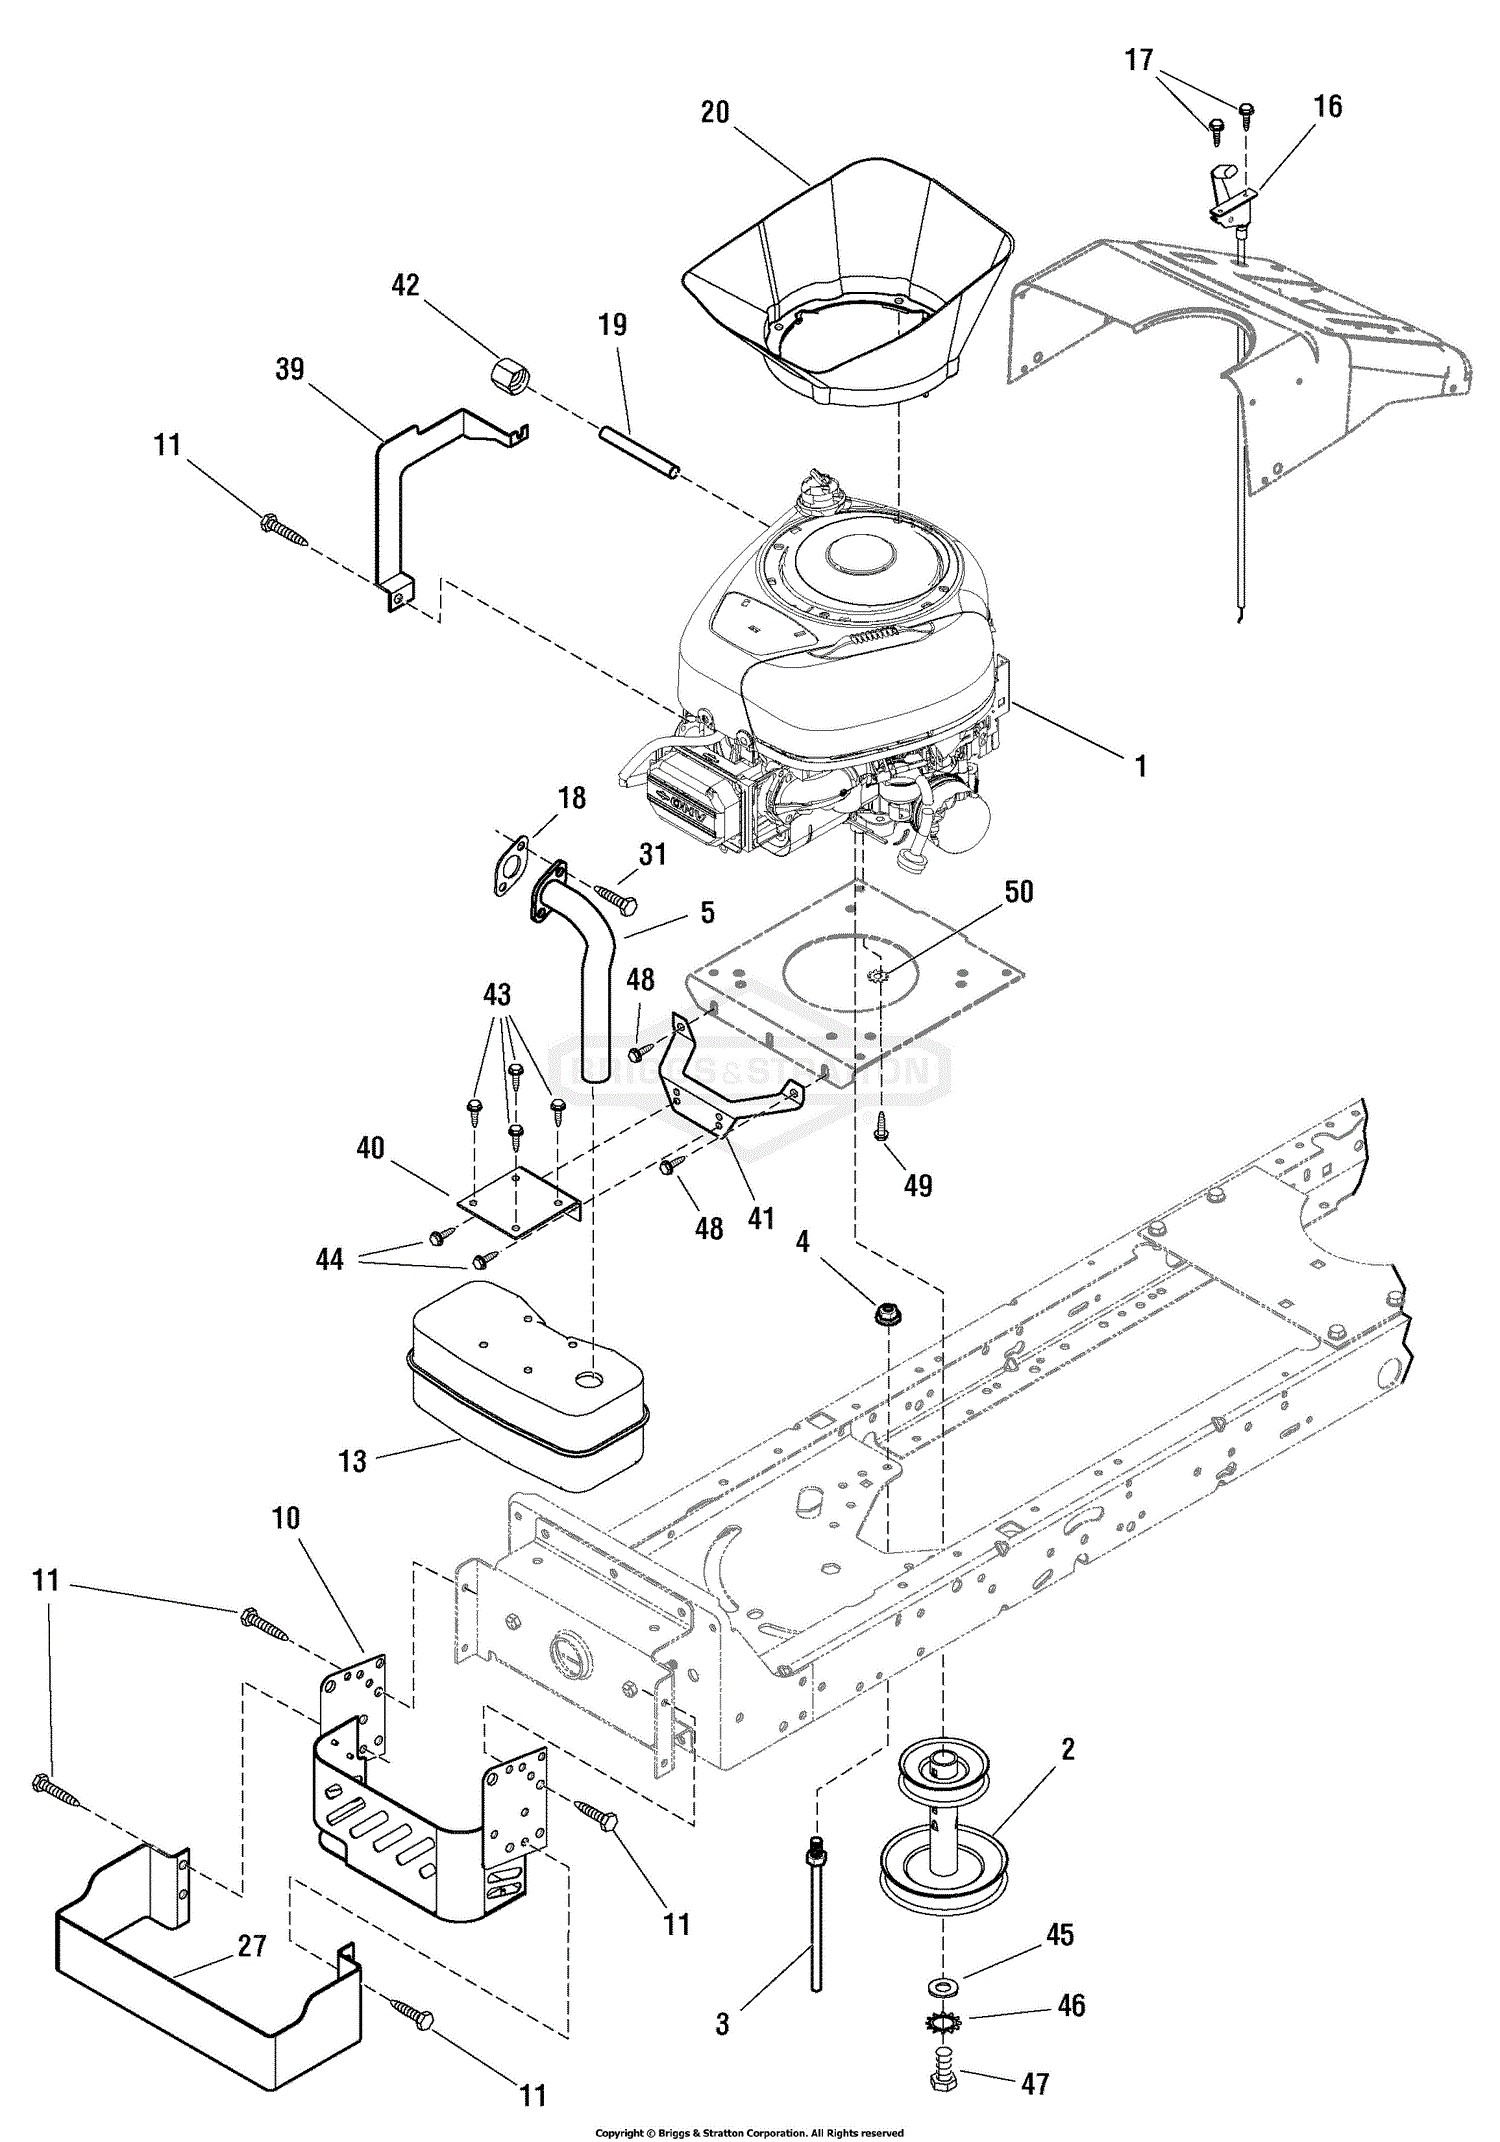 Briggs and Stratton 19 Hp Diagram Murray Rt 19 5hp 46" Hydro Drive Manual Pto Of Briggs and Stratton 19 Hp Diagram